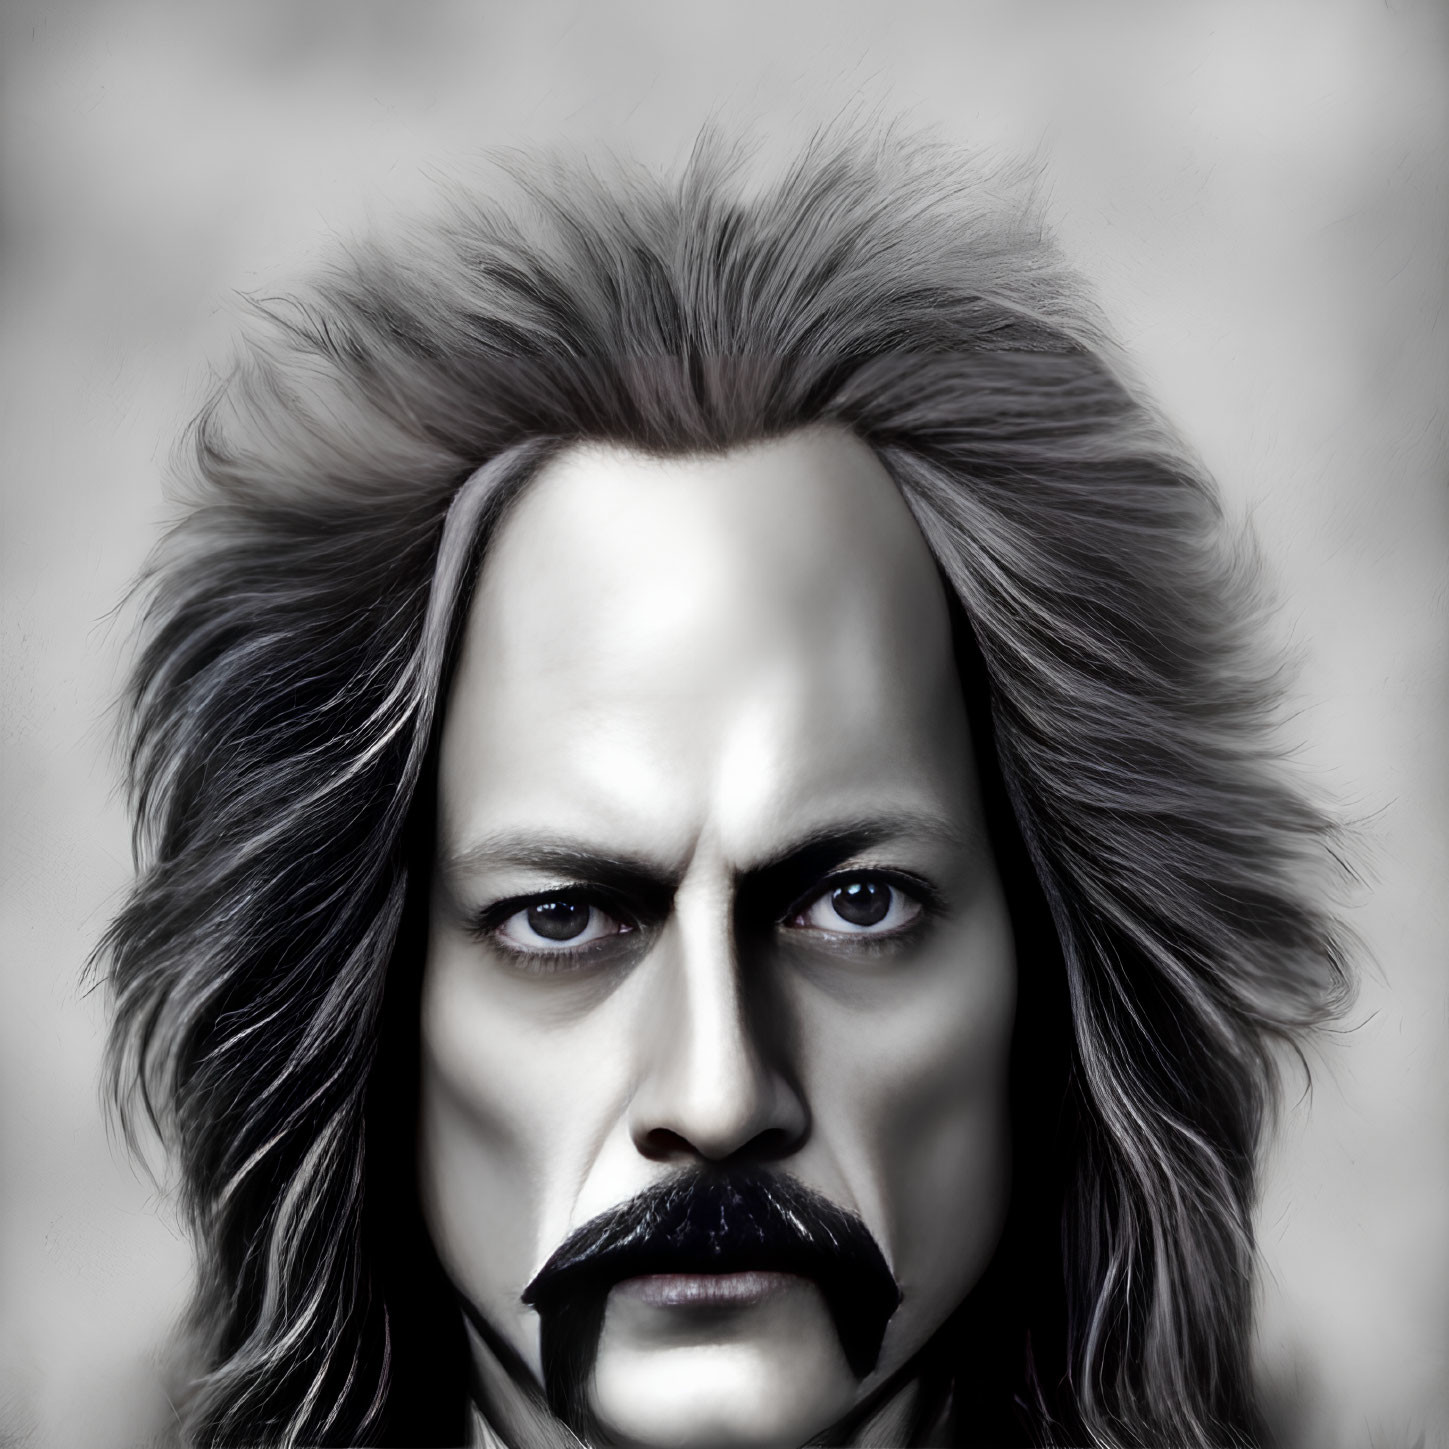 Detailed digital portrait of stern-faced person with intense eyes and dark mustache